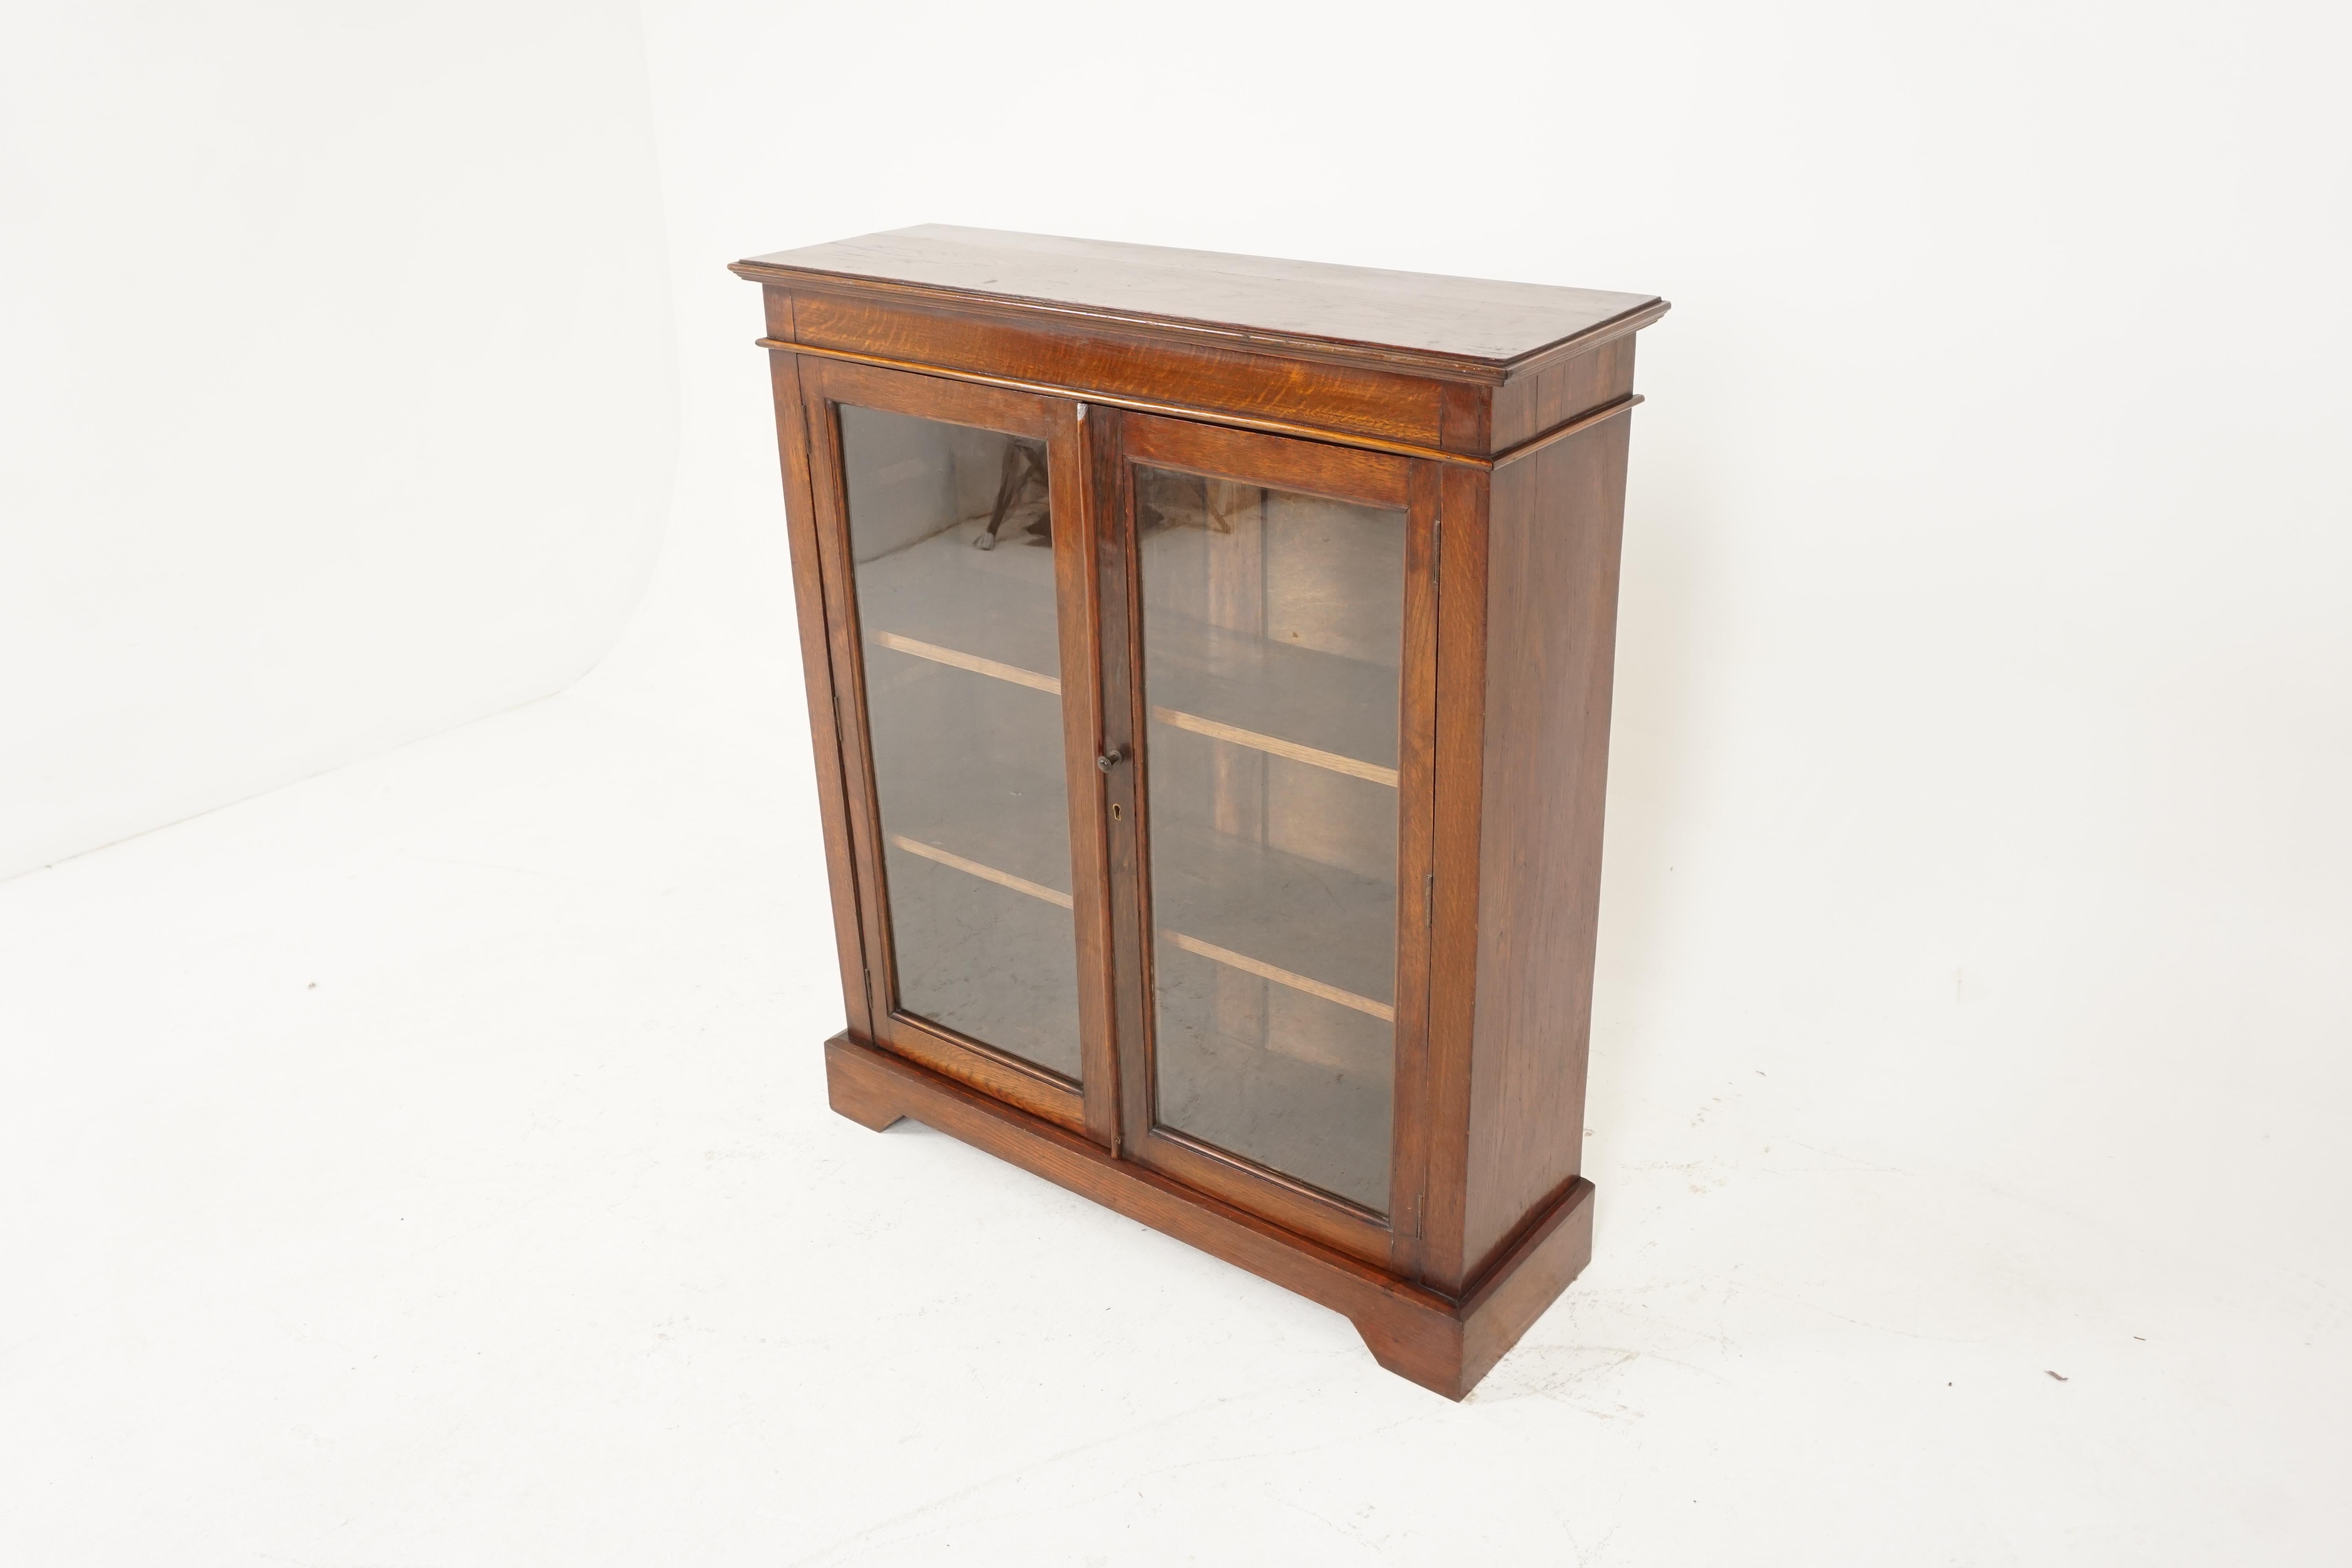 Antique oak bookcase, two door display cabinet, Scotland 1920, B2360

Scotland 1920
Solid oak
Original finish
Rectangular top with moulded cornice
Pair of original glass doors
Inside a pair of adjustable shelves
Standing on a plinth